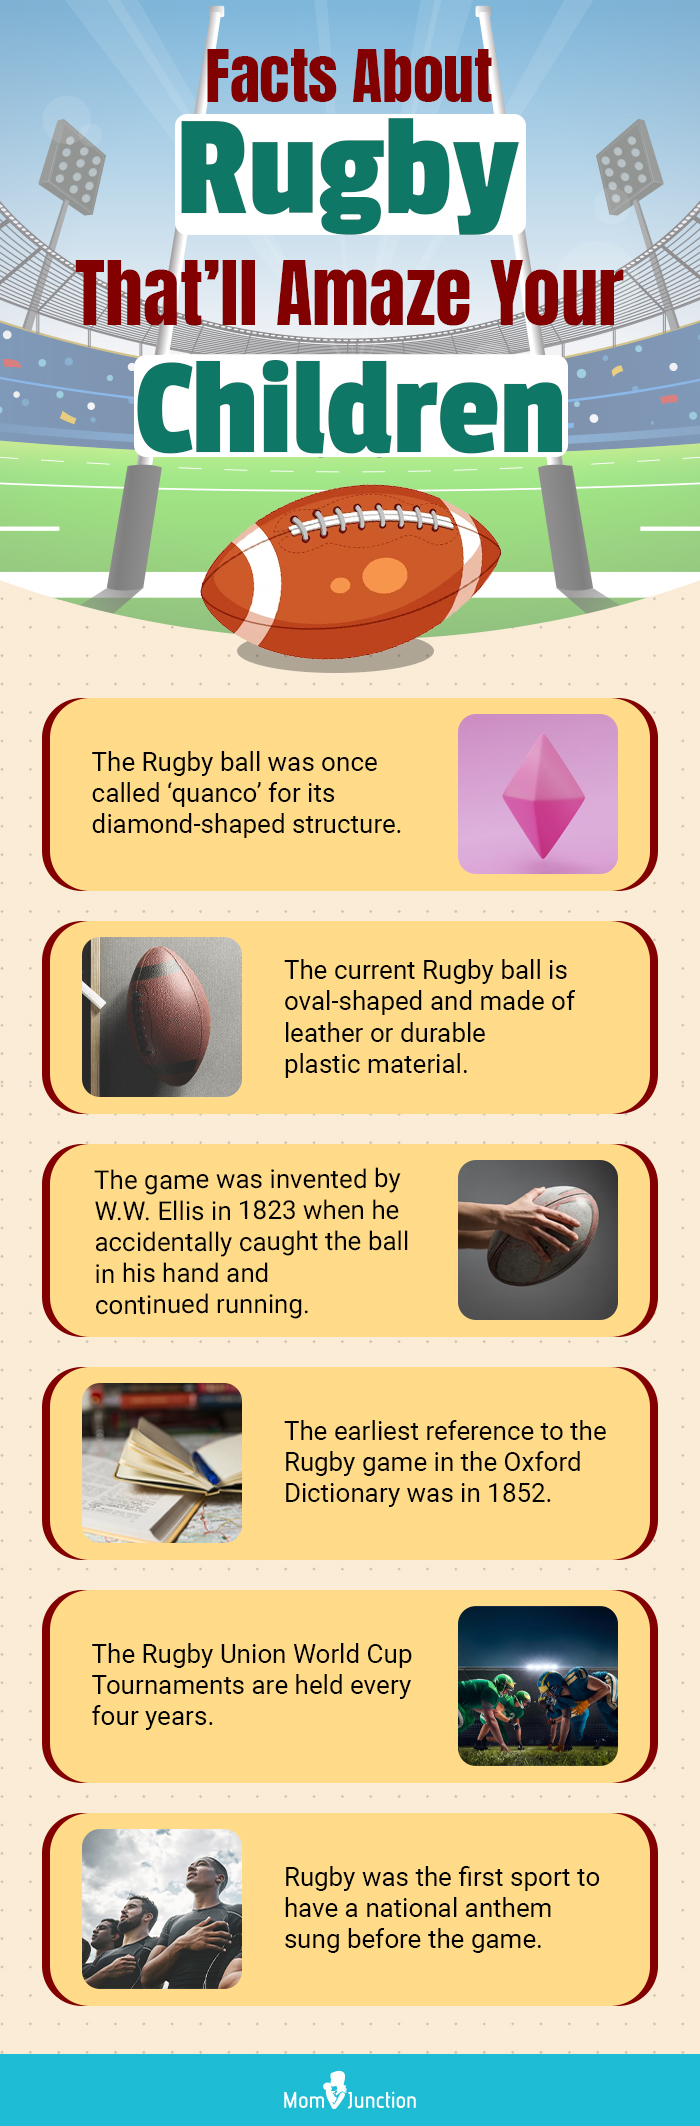 facts about rugby that will amaze your children (infographic)